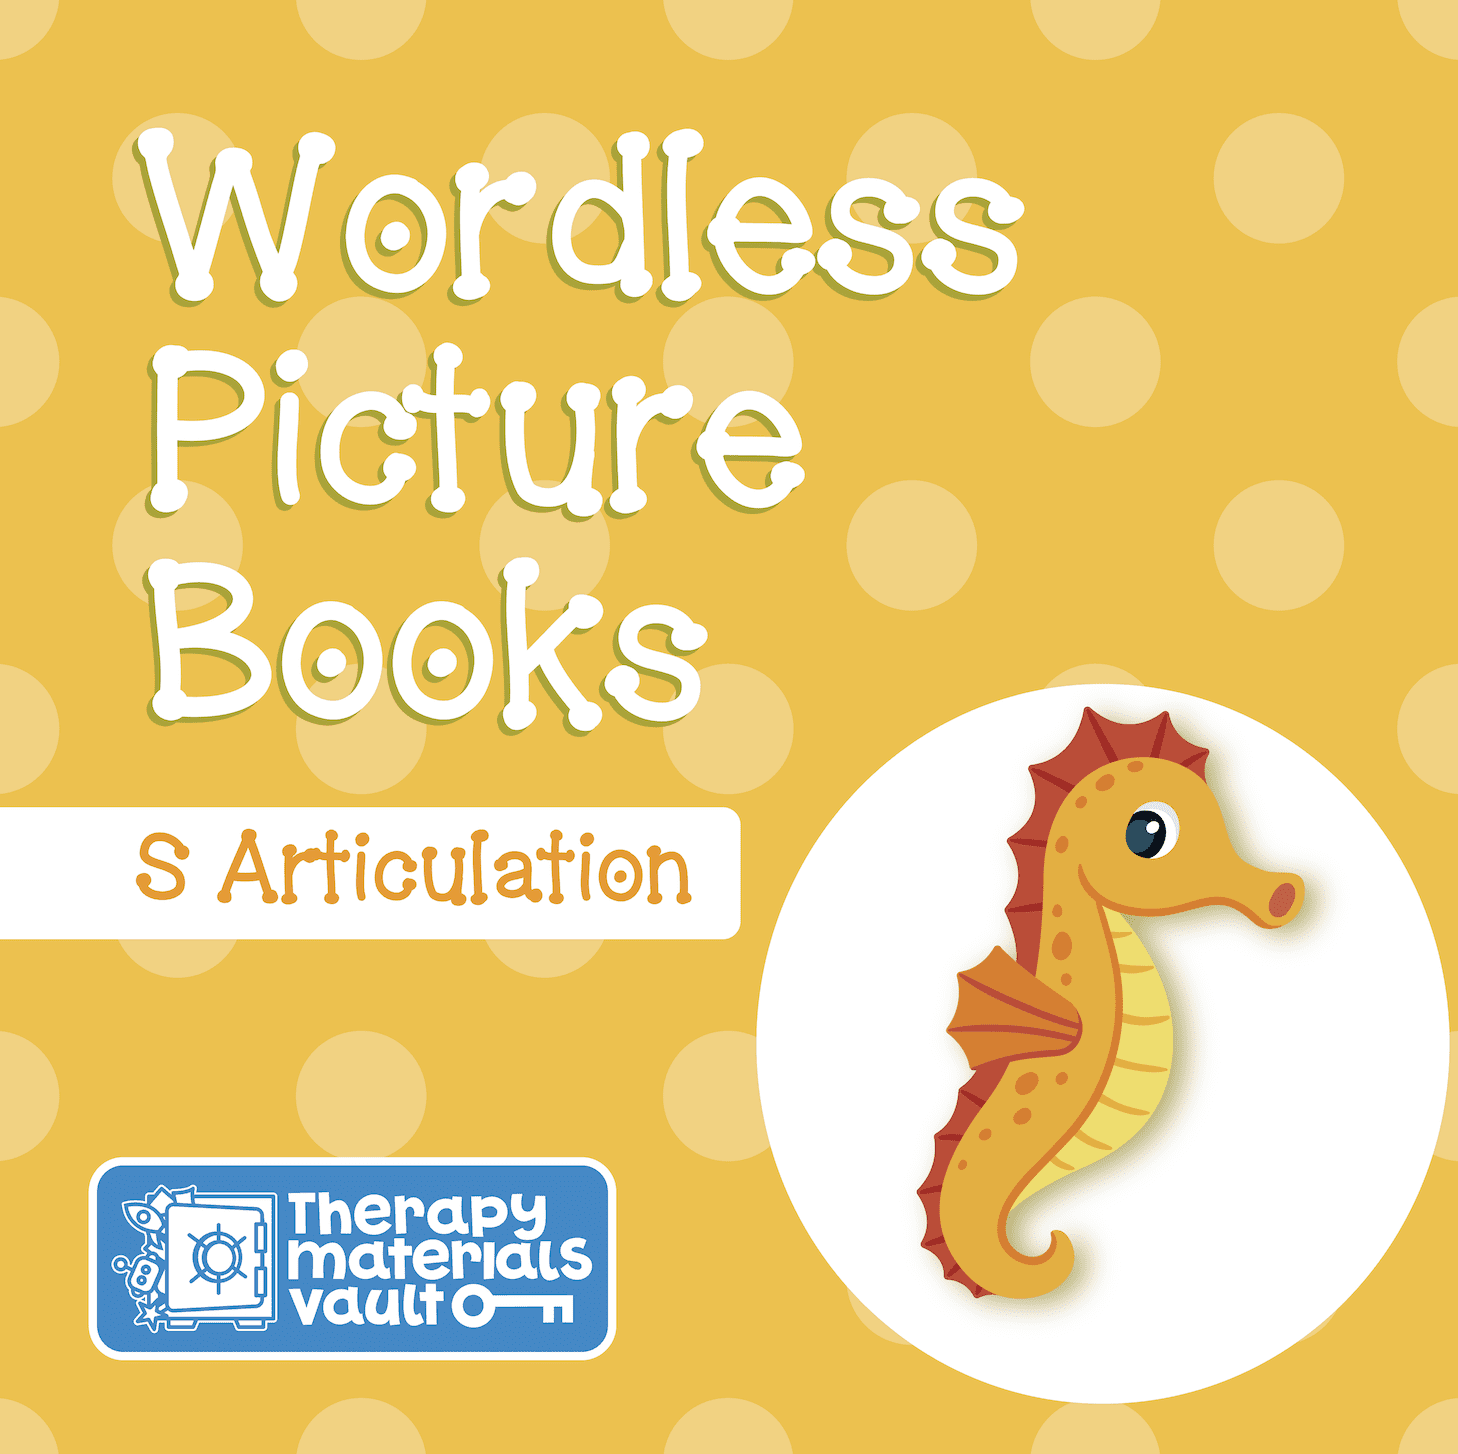 Wordless Picture Book (S Articulation)